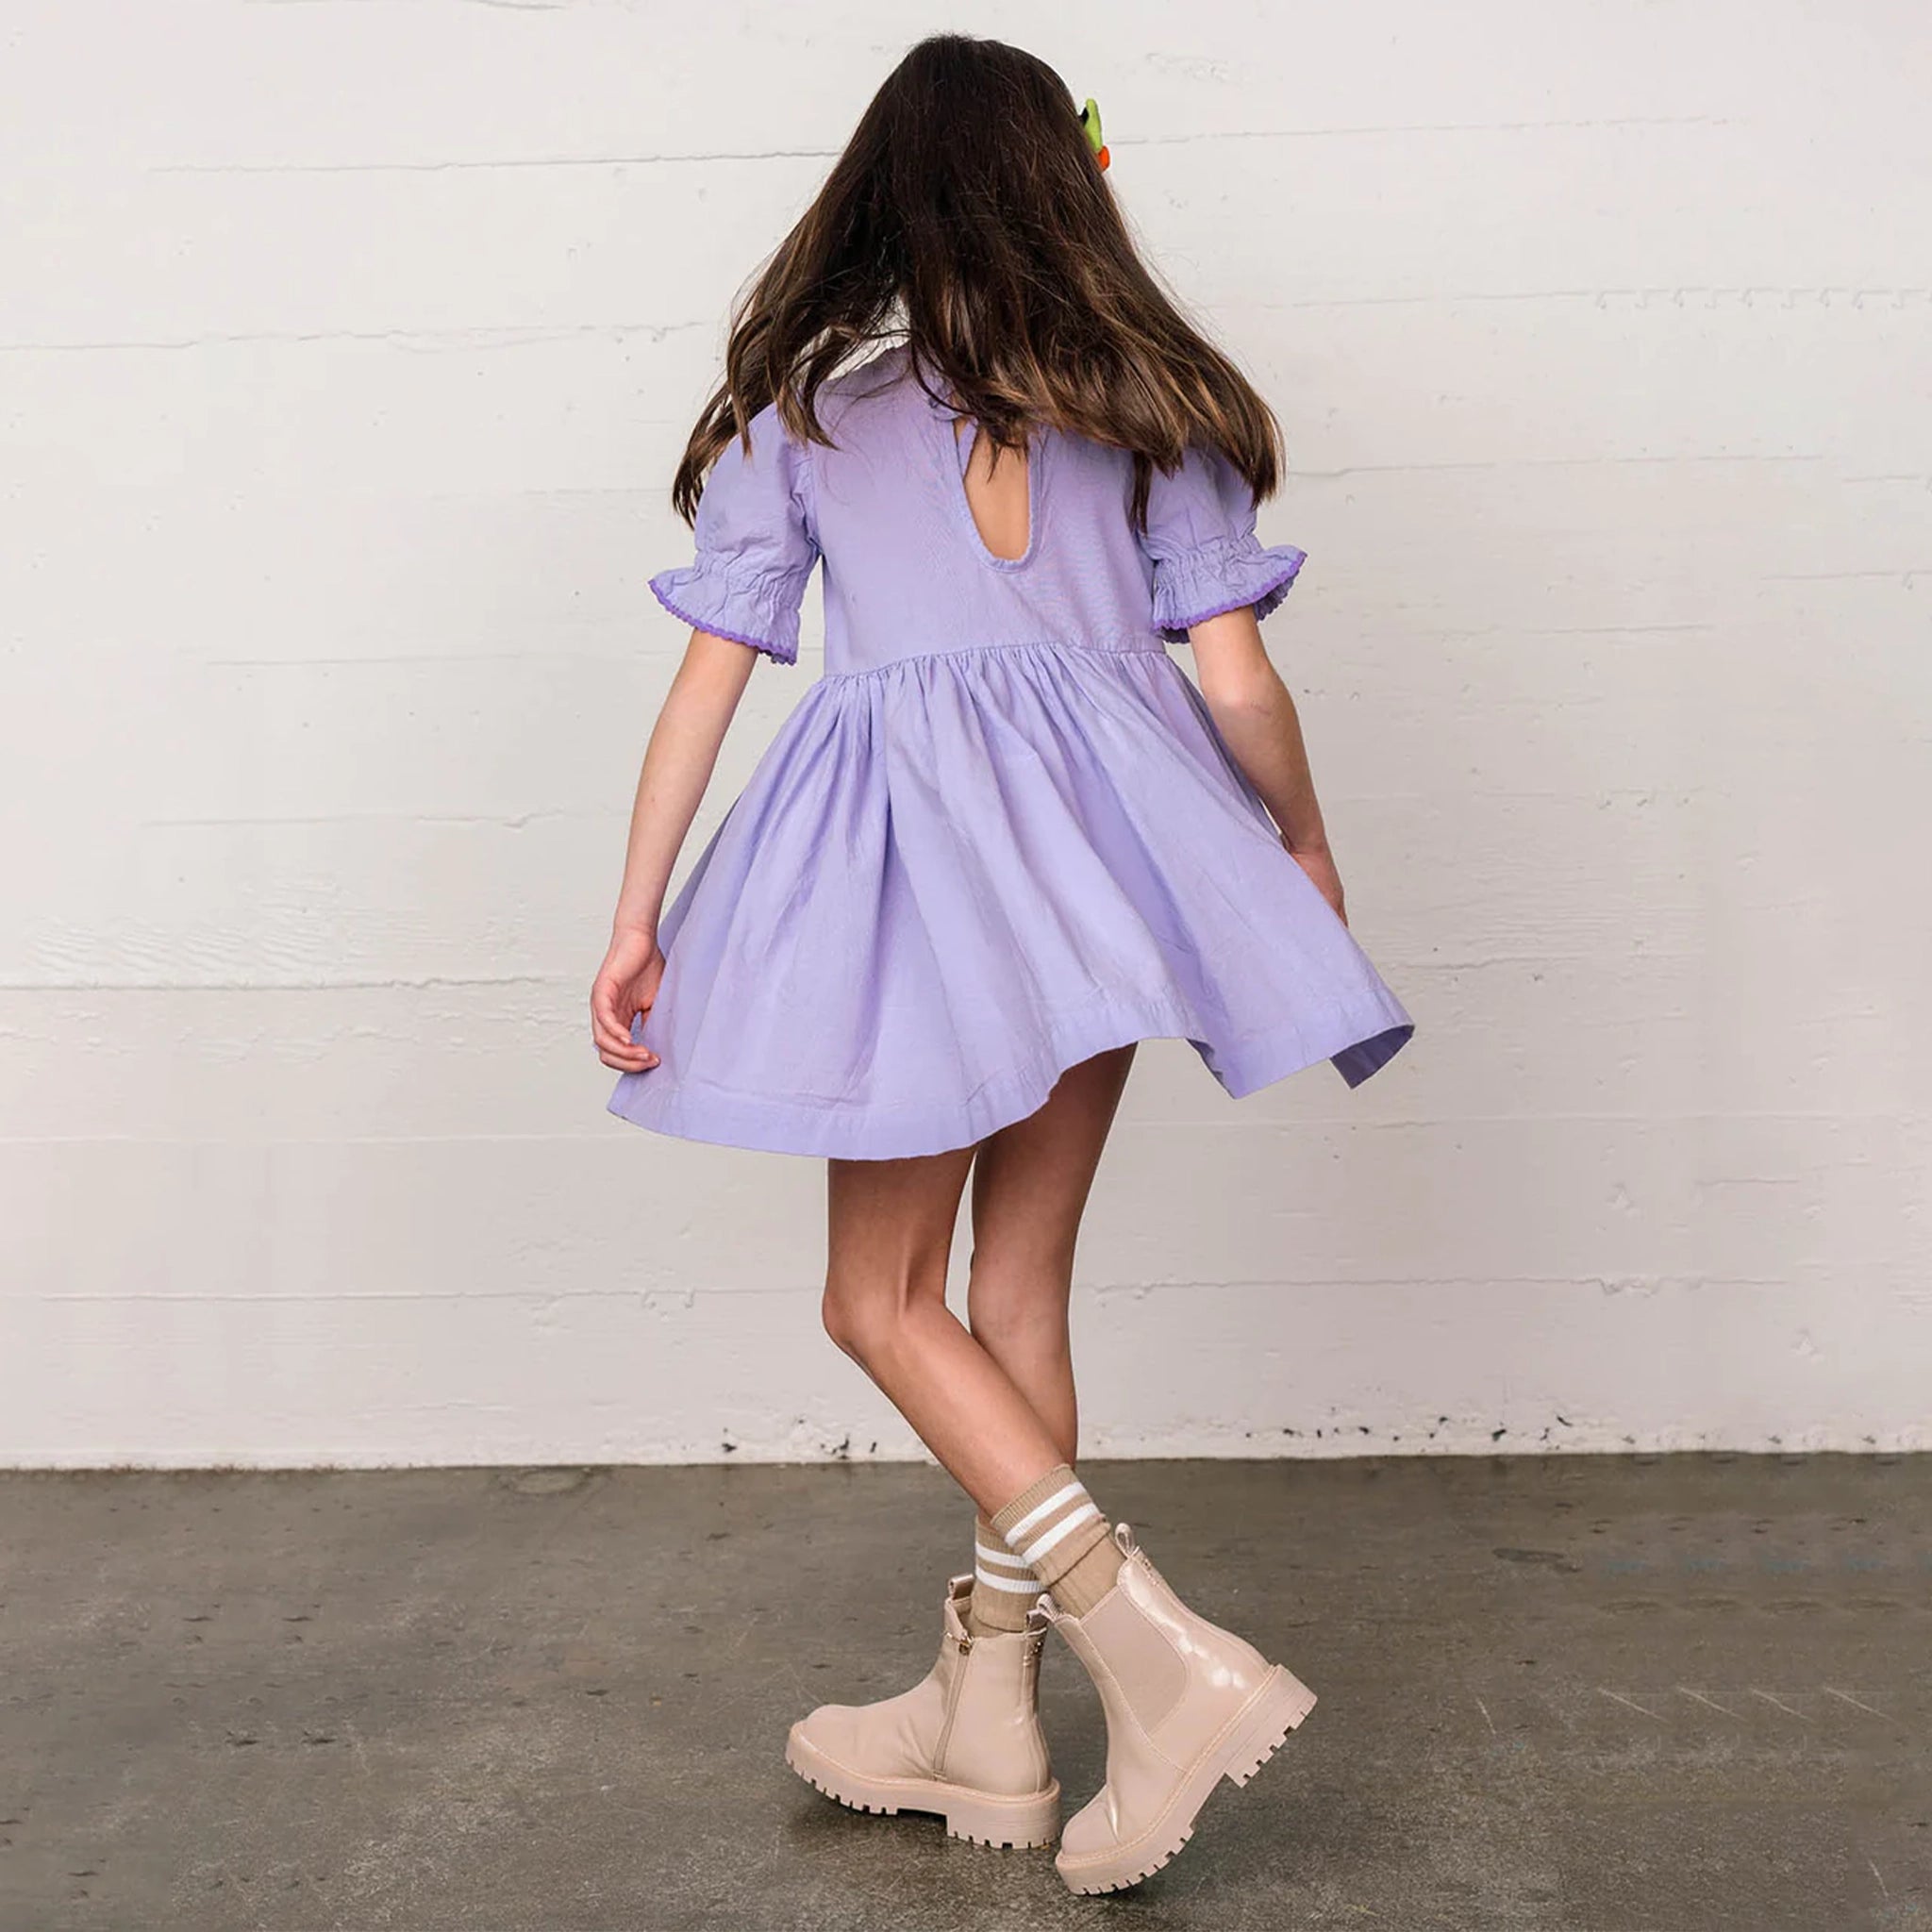 In front of a cream wall is a children's model wearing a lavender baby doll style dress with puff sleeves and a flowy skirt that hits right above the knee.